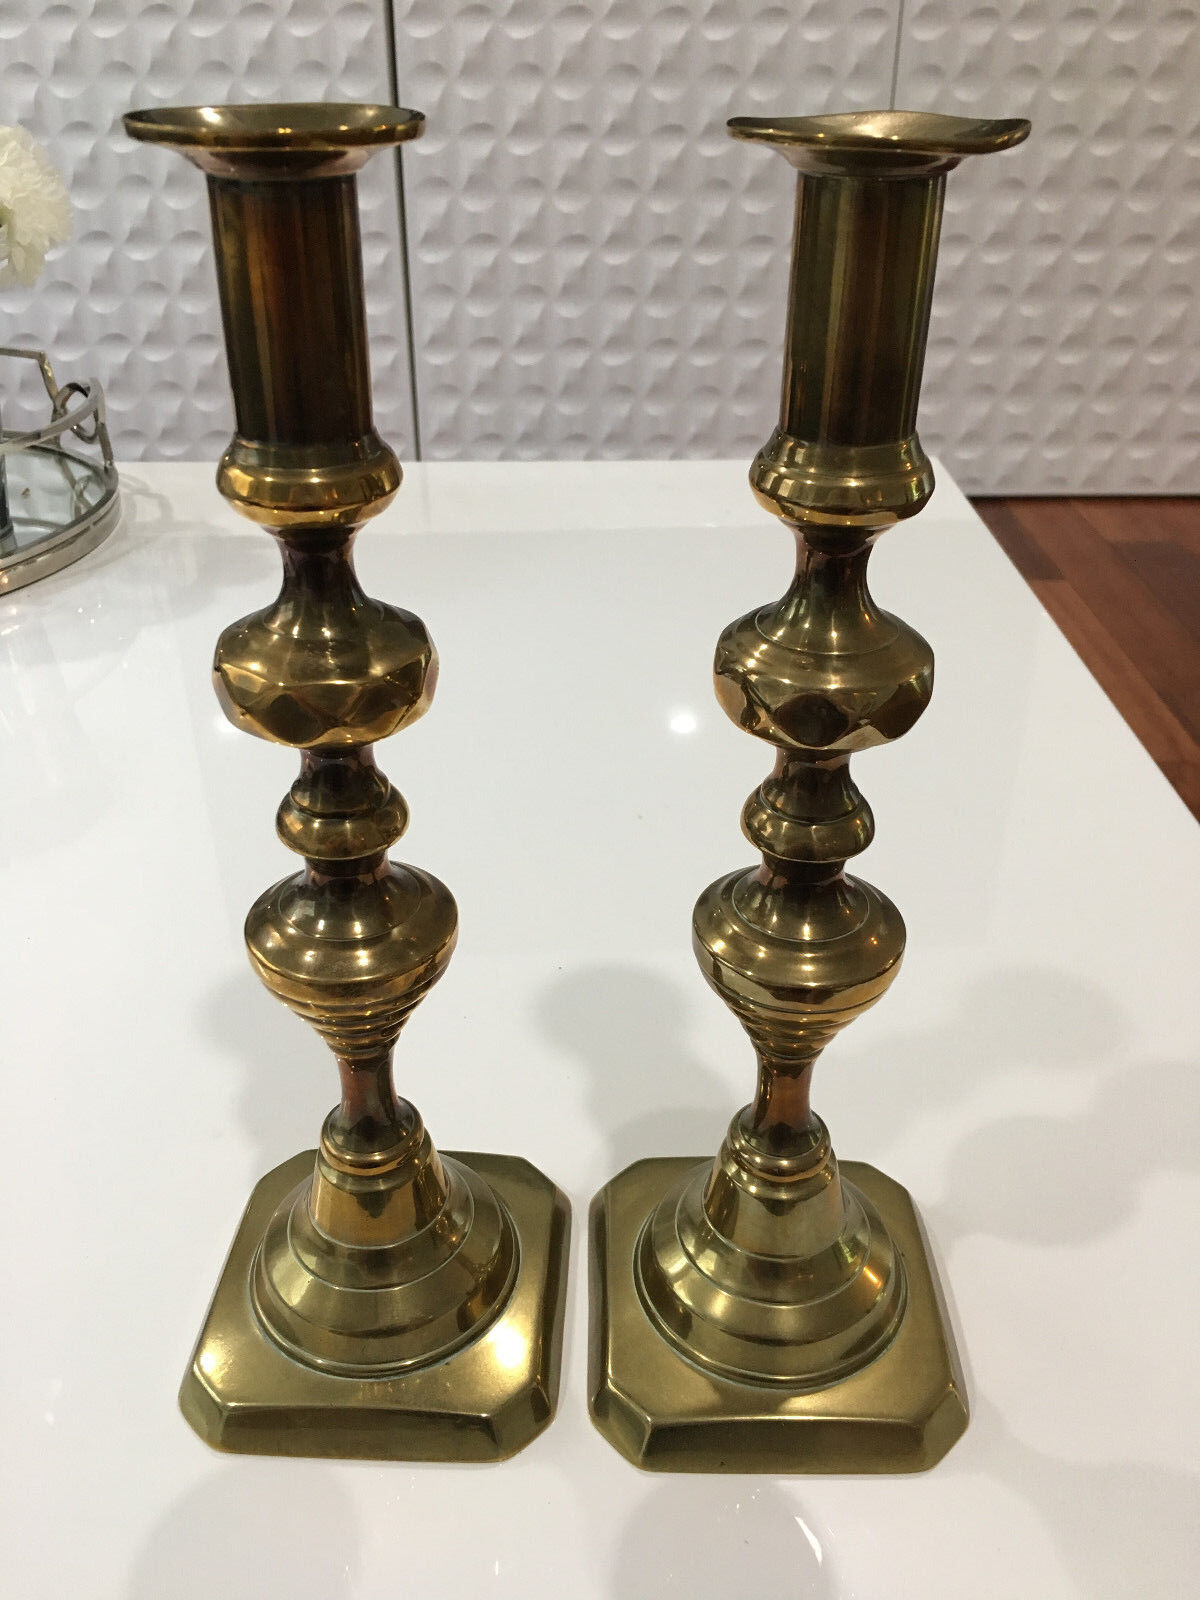 Antique 19th Cent. or Earlier Pair of Brass Candlesticks Candle Holders Beehive